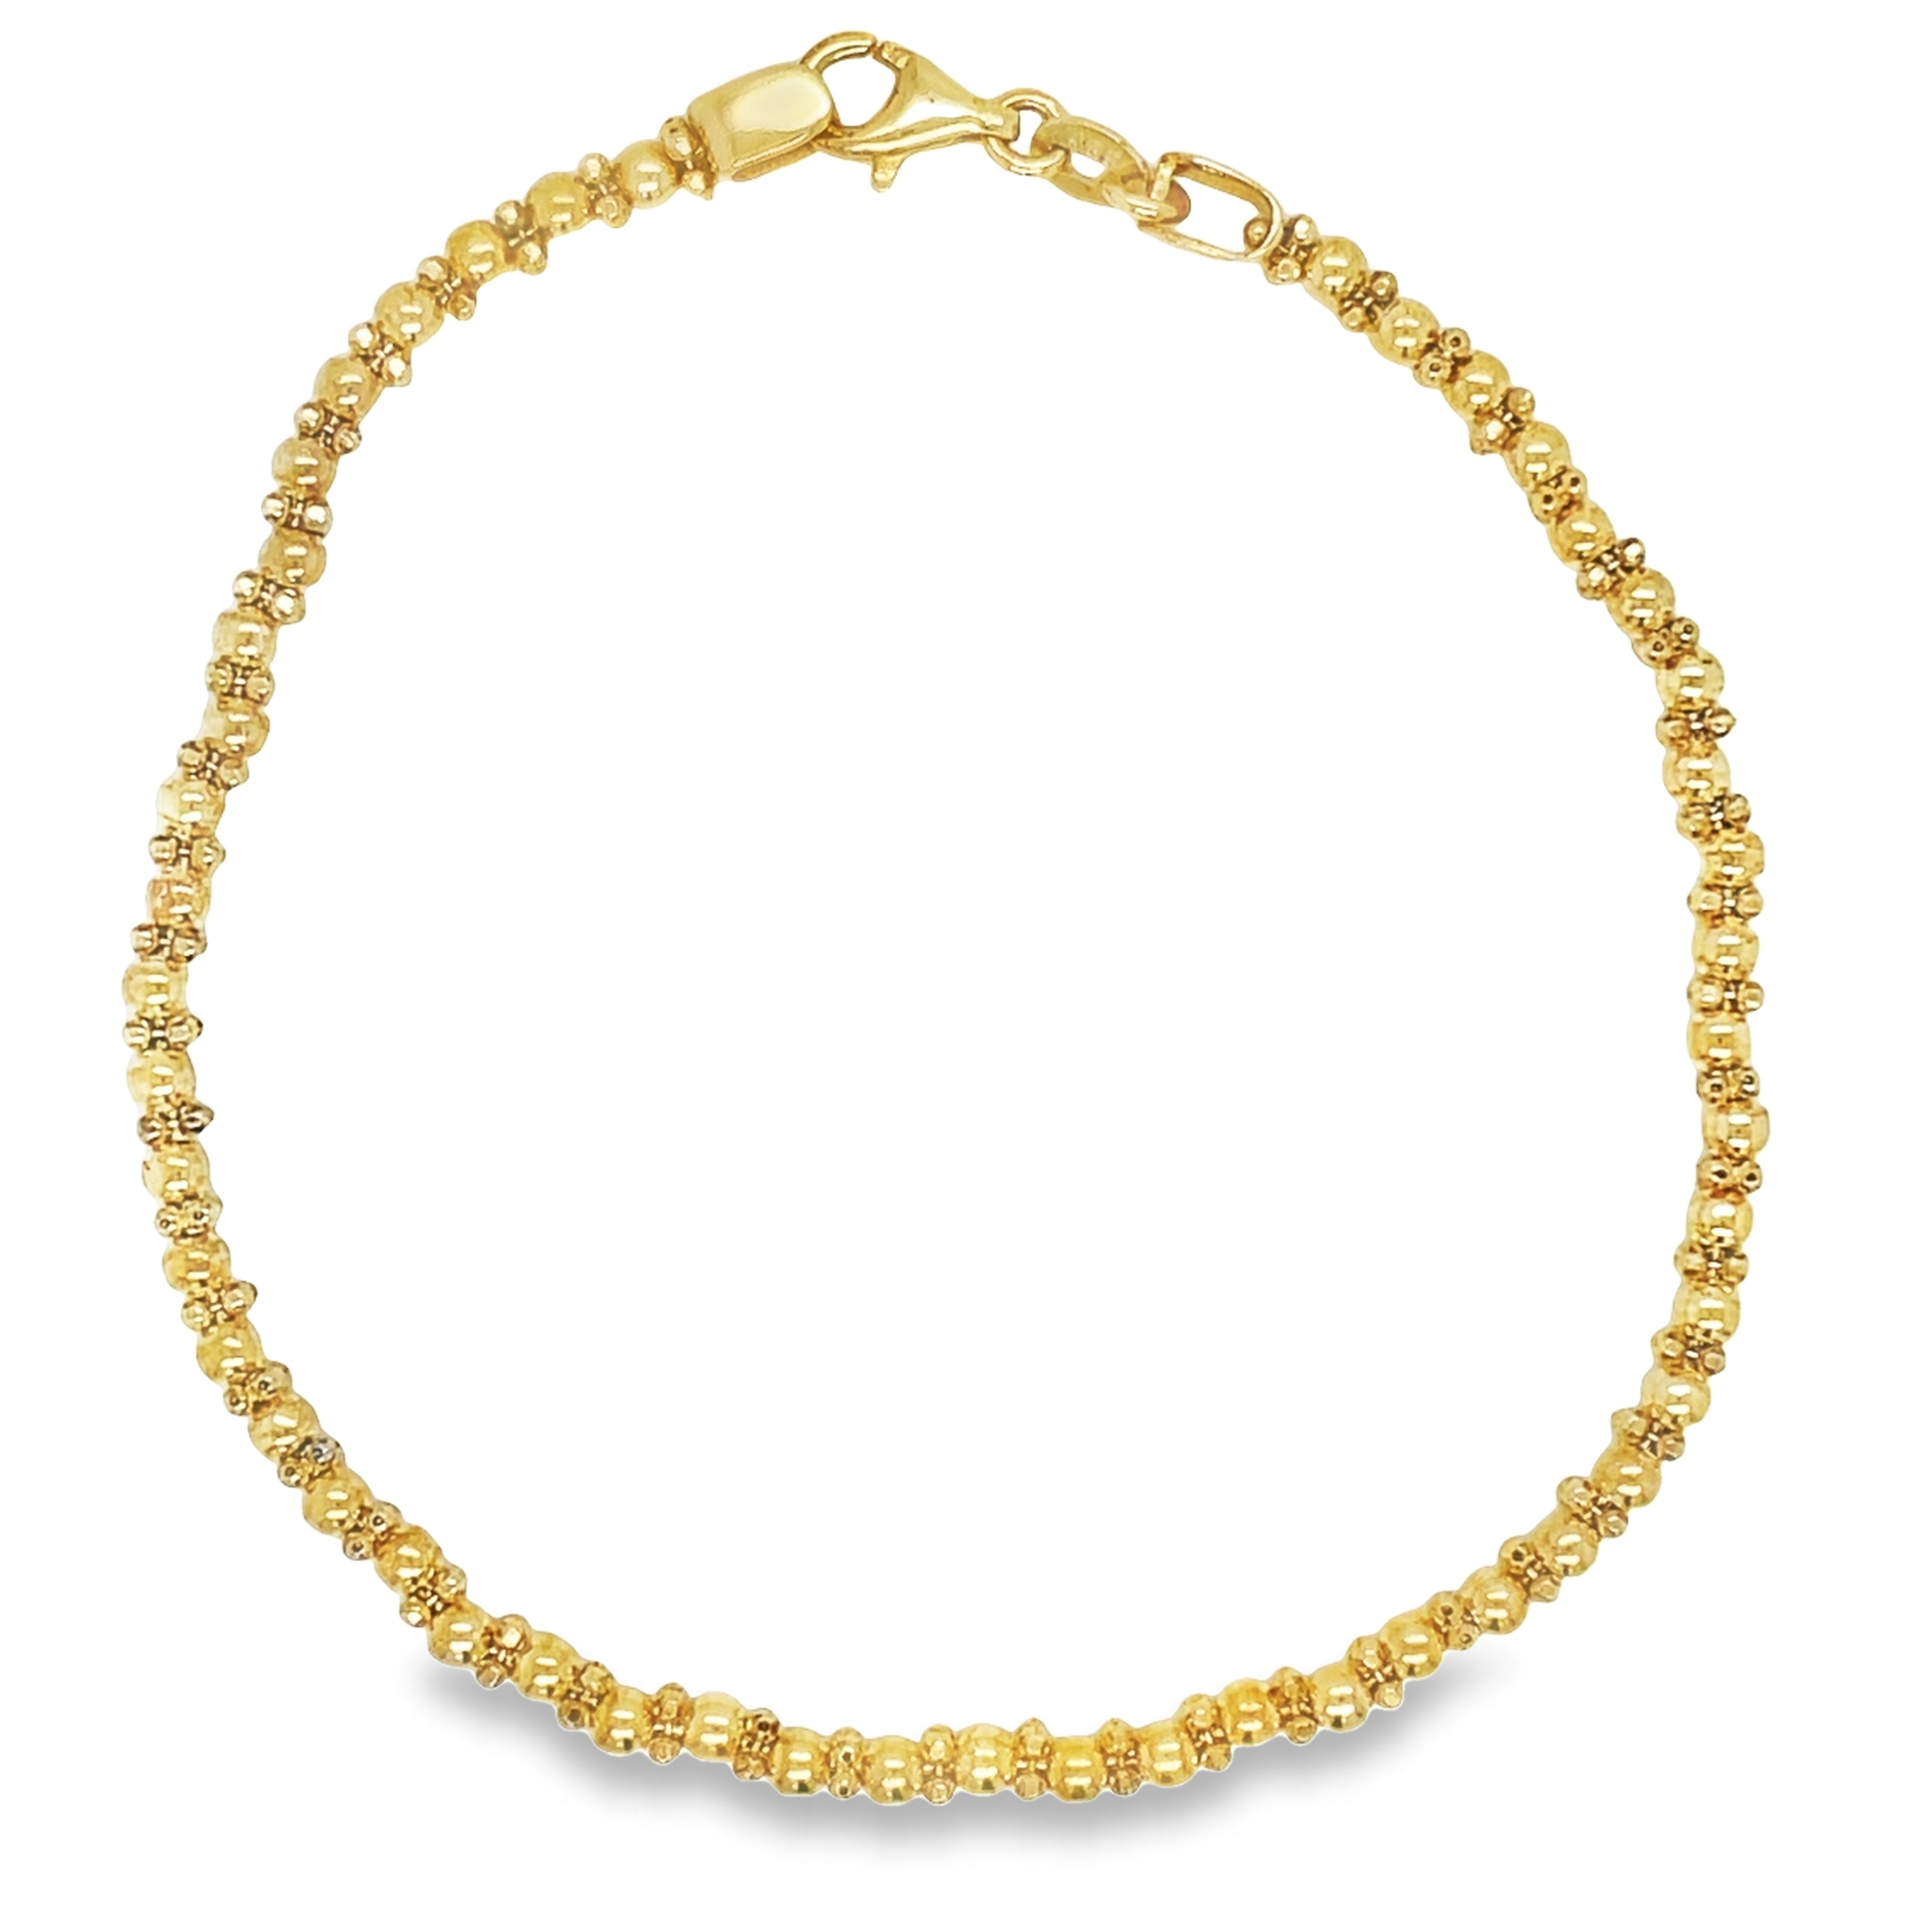 Crafted from luxurious 14k yellow gold, this elegant popcorn bracelet boasts a secure clasp for worry-free wear. Its 7" length sits comfortably on the wrist, while the solid gold construction adds a touch of sophistication. Elevate any outfit with this timeless piece.